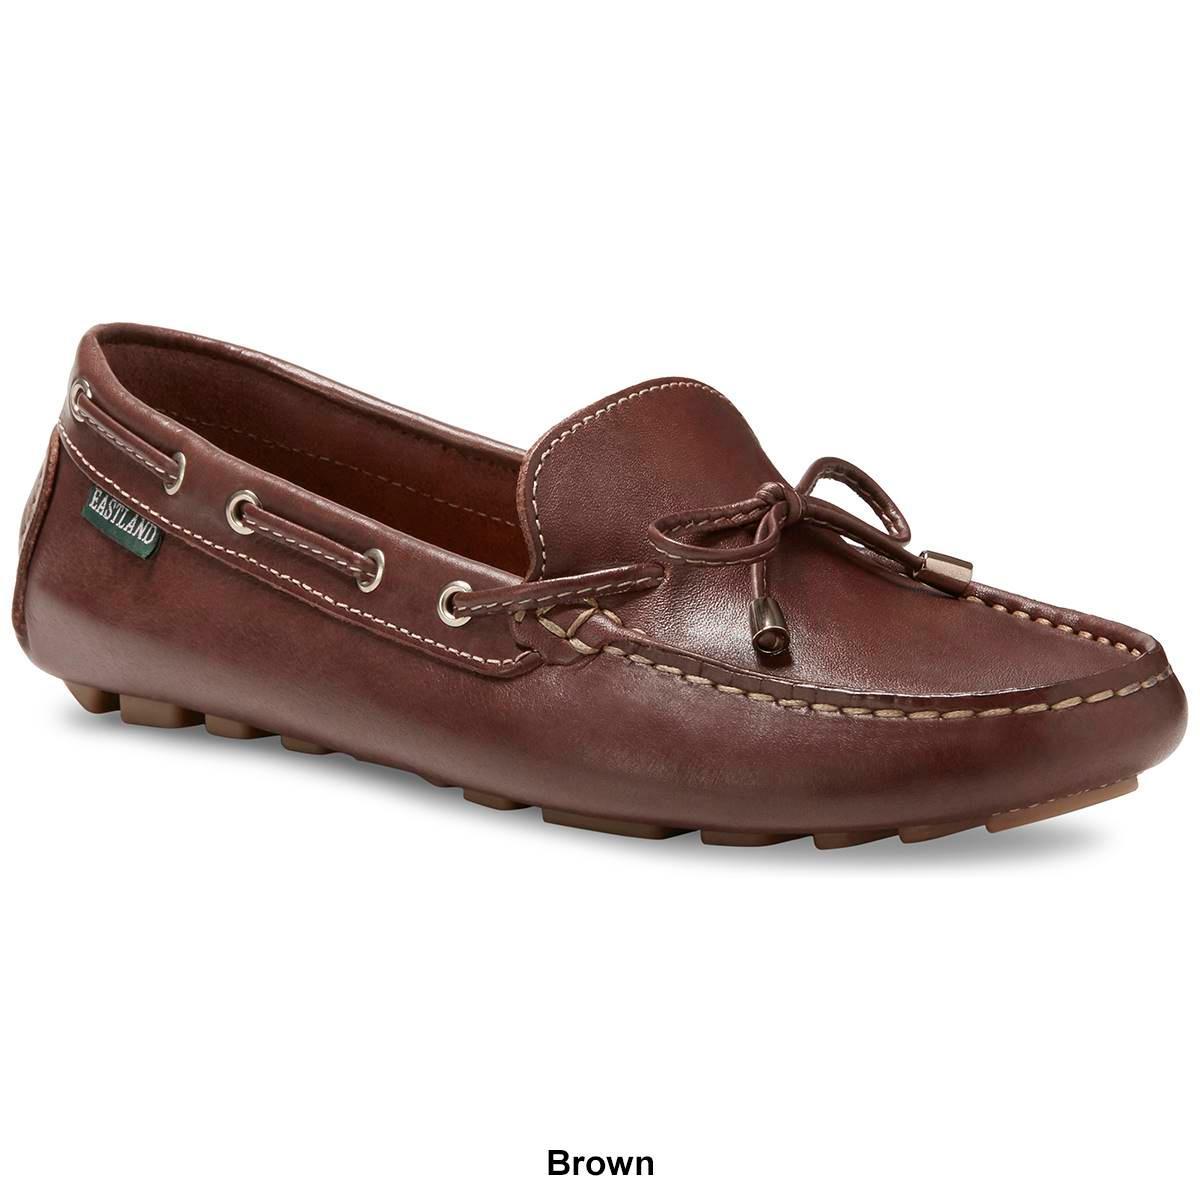 Womens Eastland Marcella Loafers Product Image